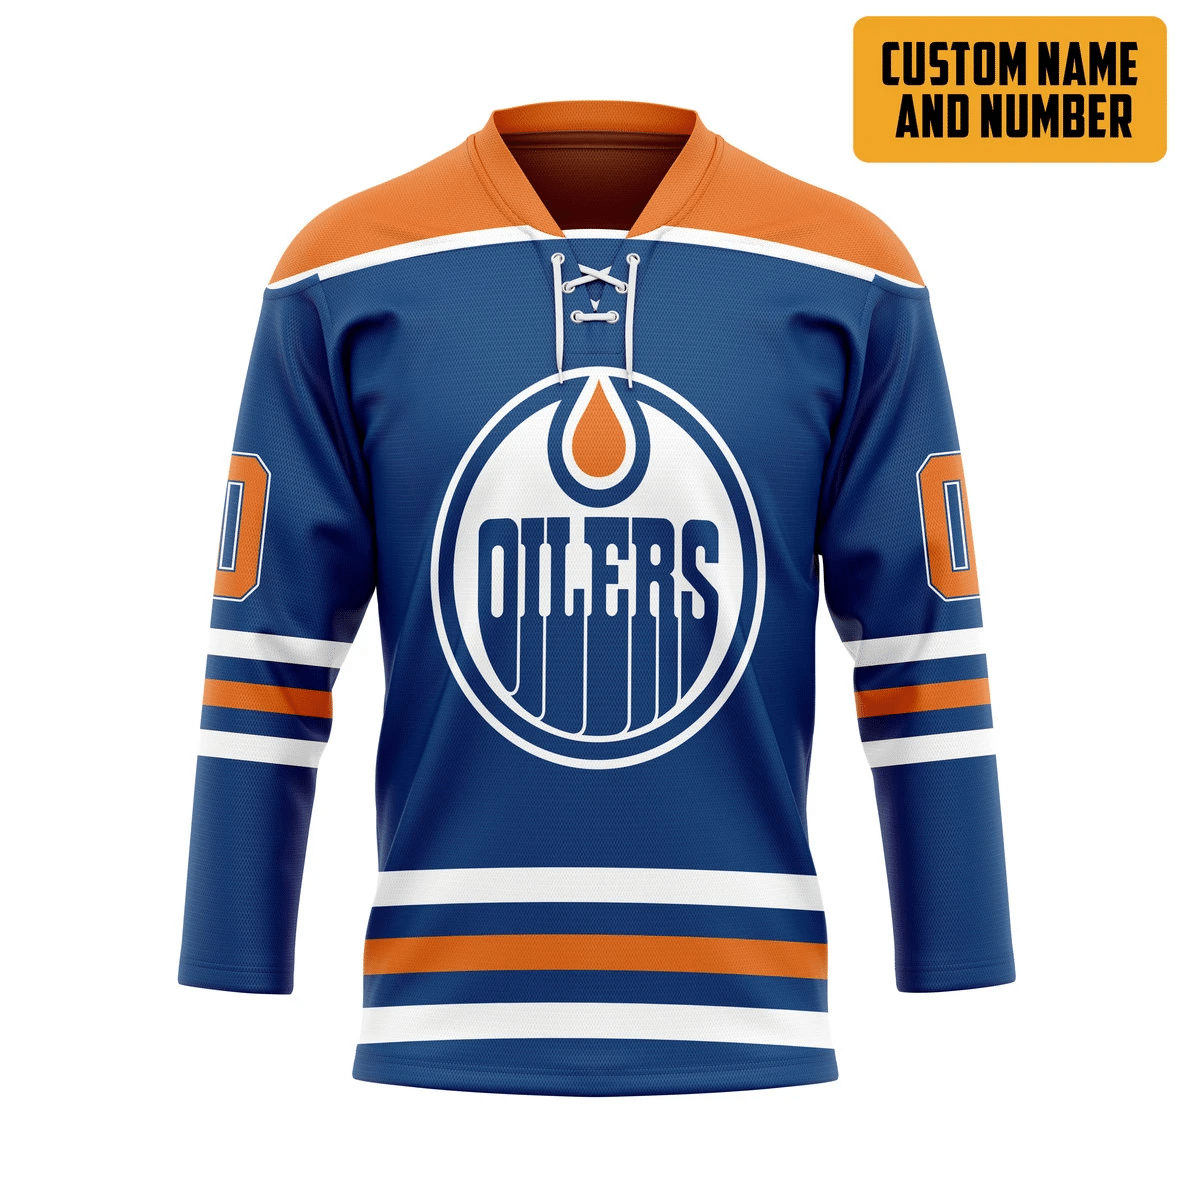 We have many different types of hockey jerseys. 18